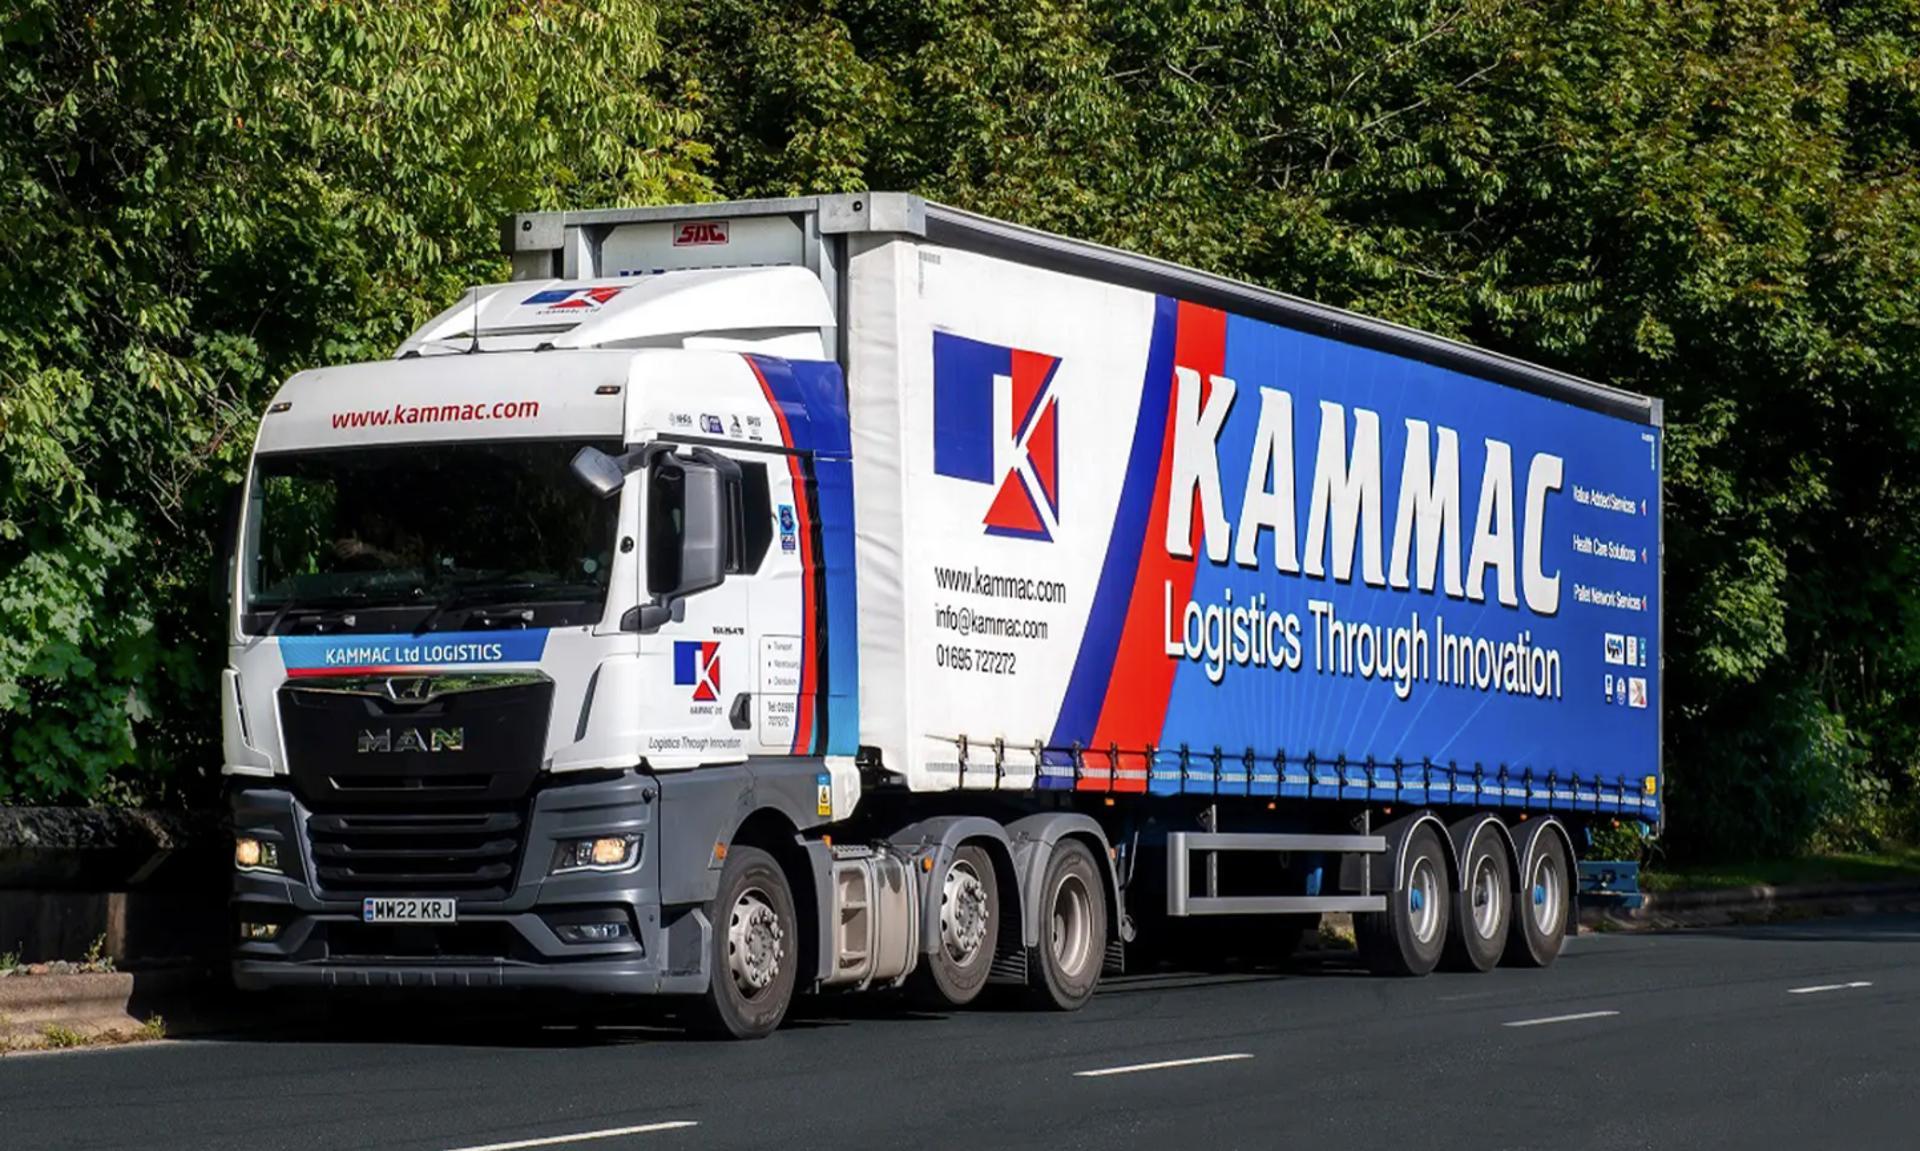 North West logistics firm to be acquired by Elanders in £100m+ deal